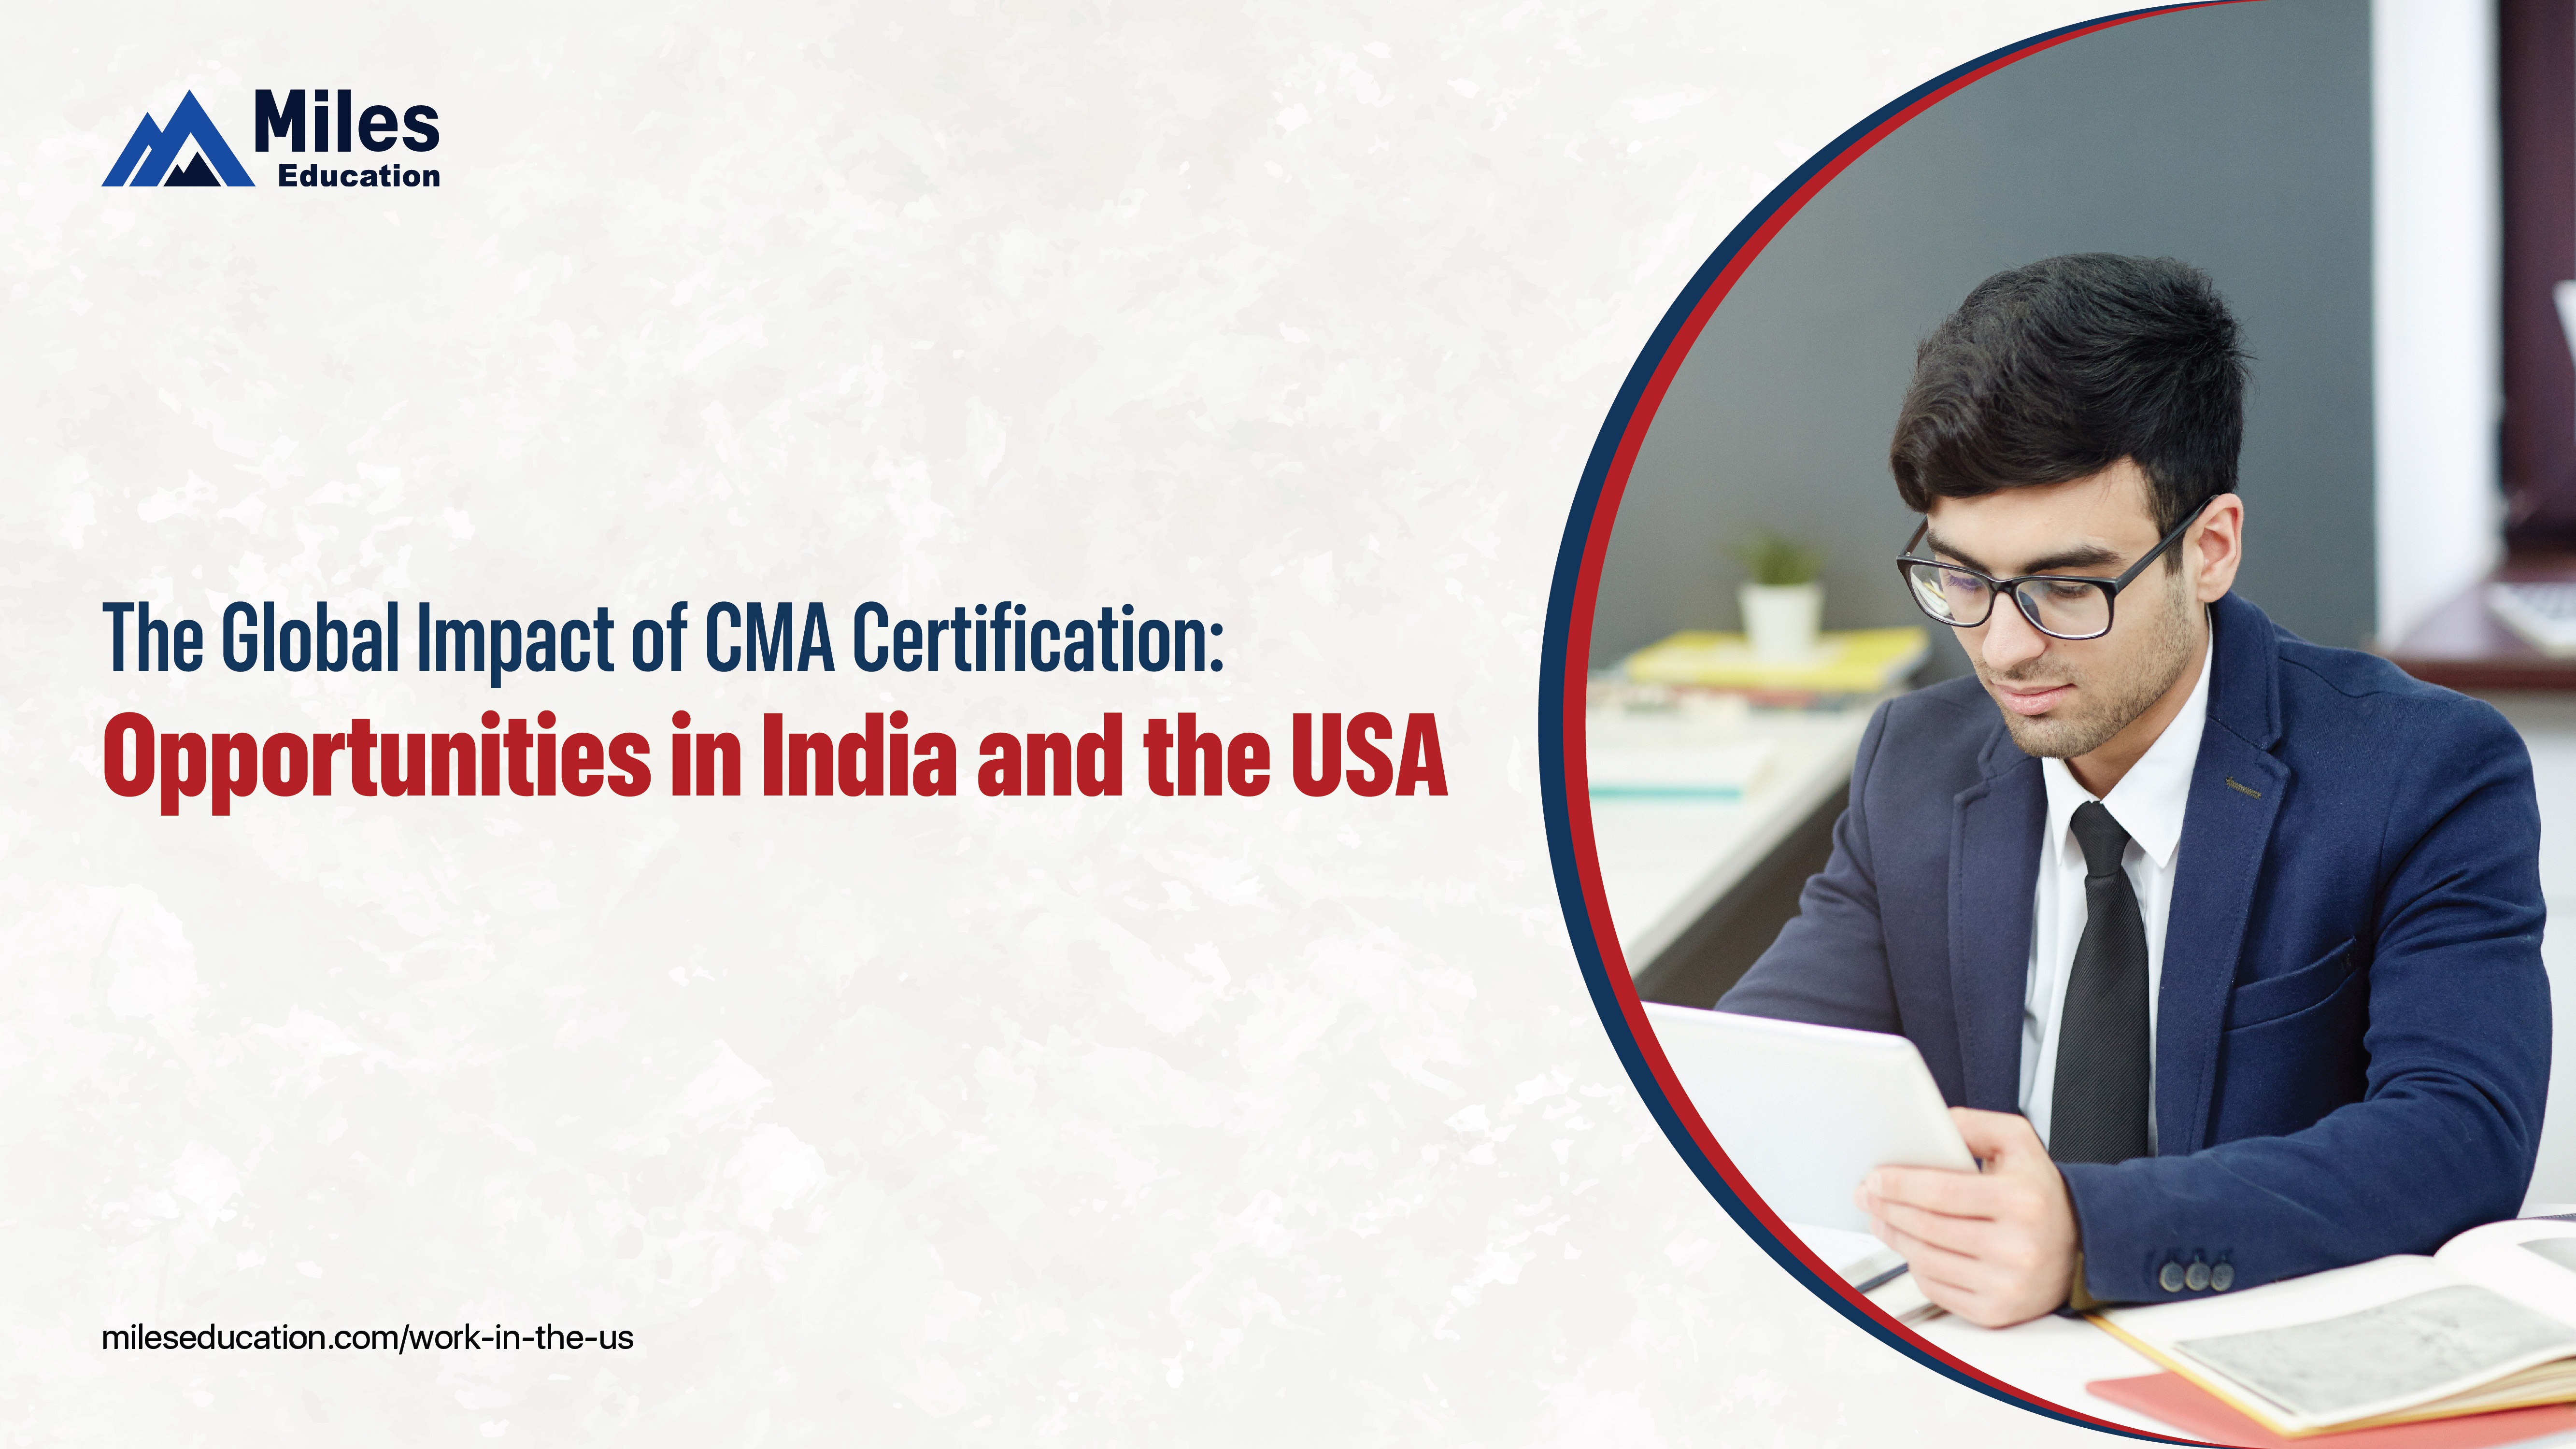 The Global Impact of CMA Certification: Opportunities in India and the USA